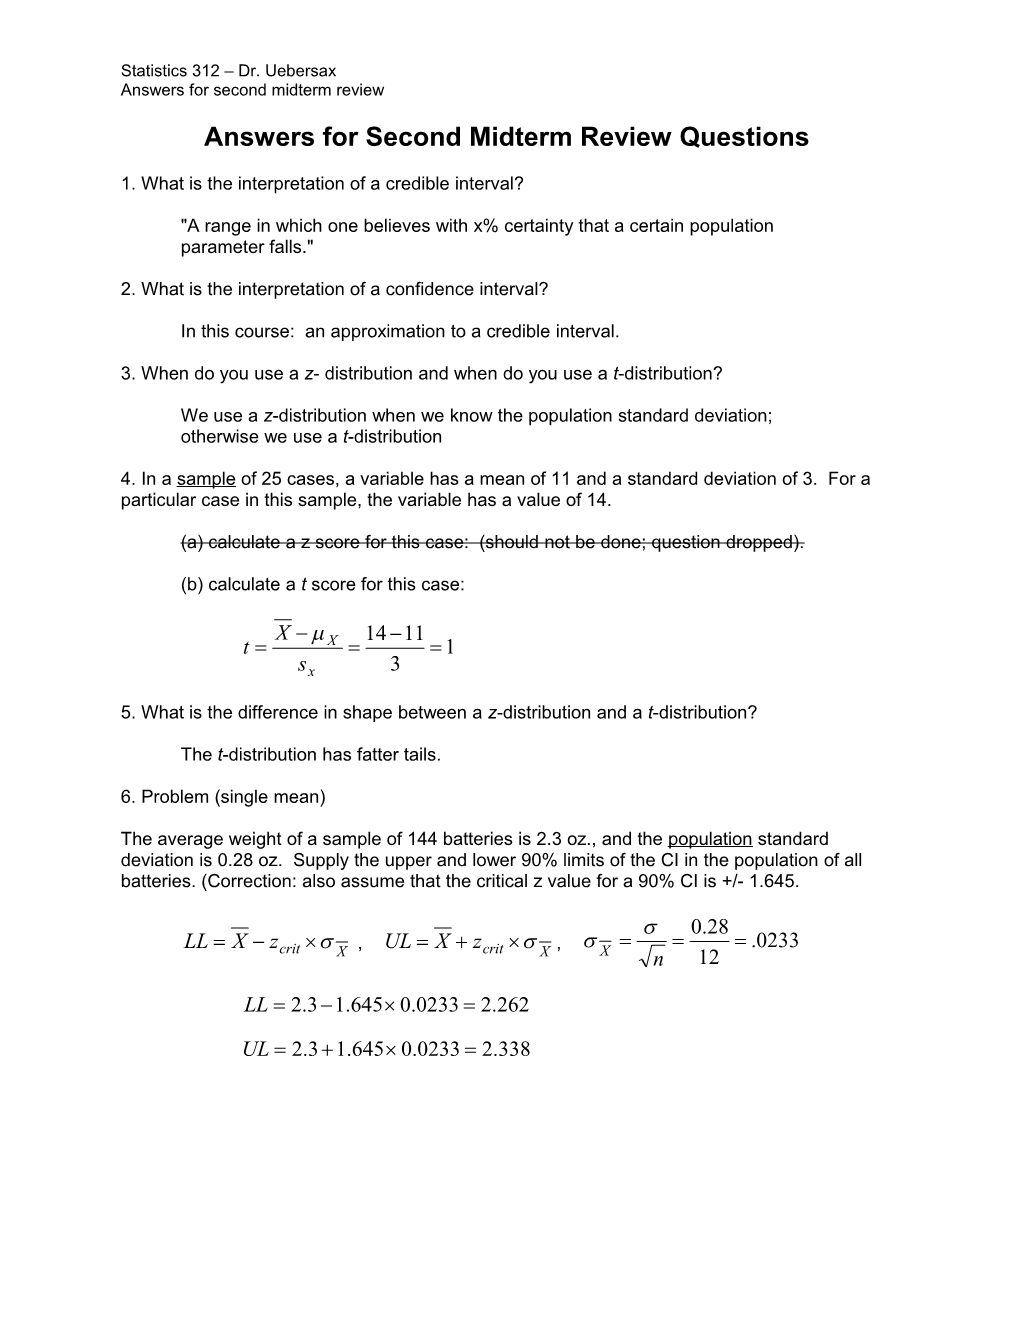 Answers for Second Midterm Review Questions